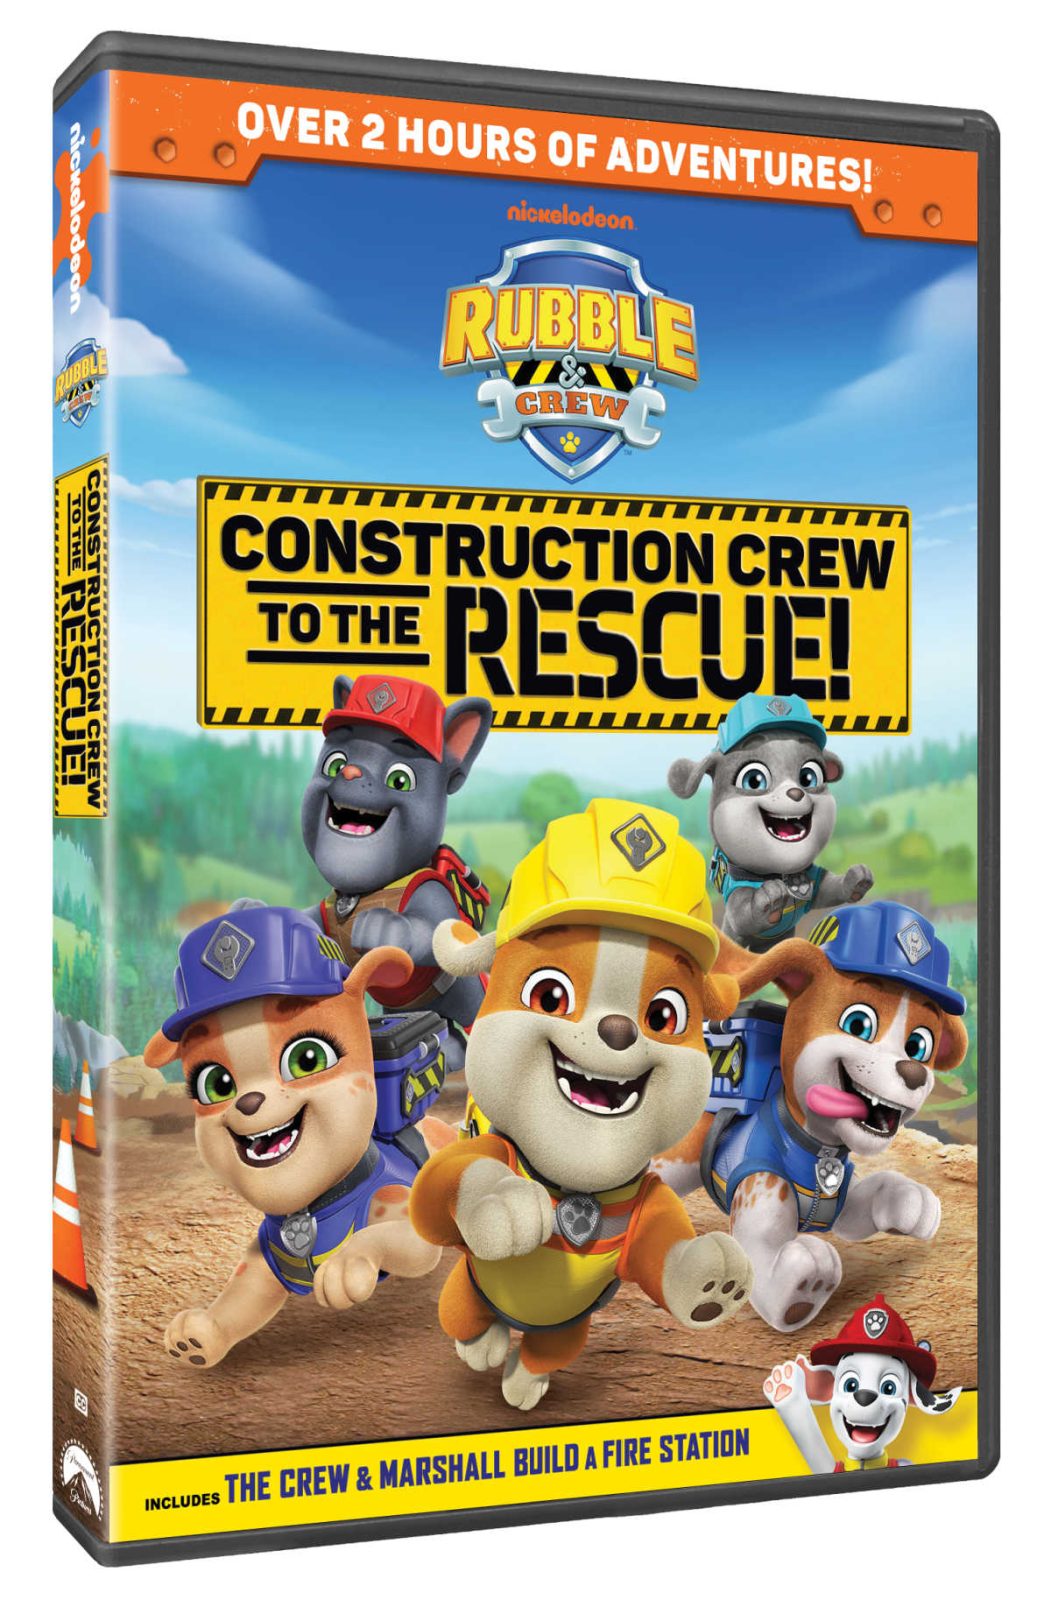 Get ready to build, rescue, and have tons of fun with the new Rubble & Crew: Construction Crew to the Rescue DVD! Over 2 hours of adventures await!